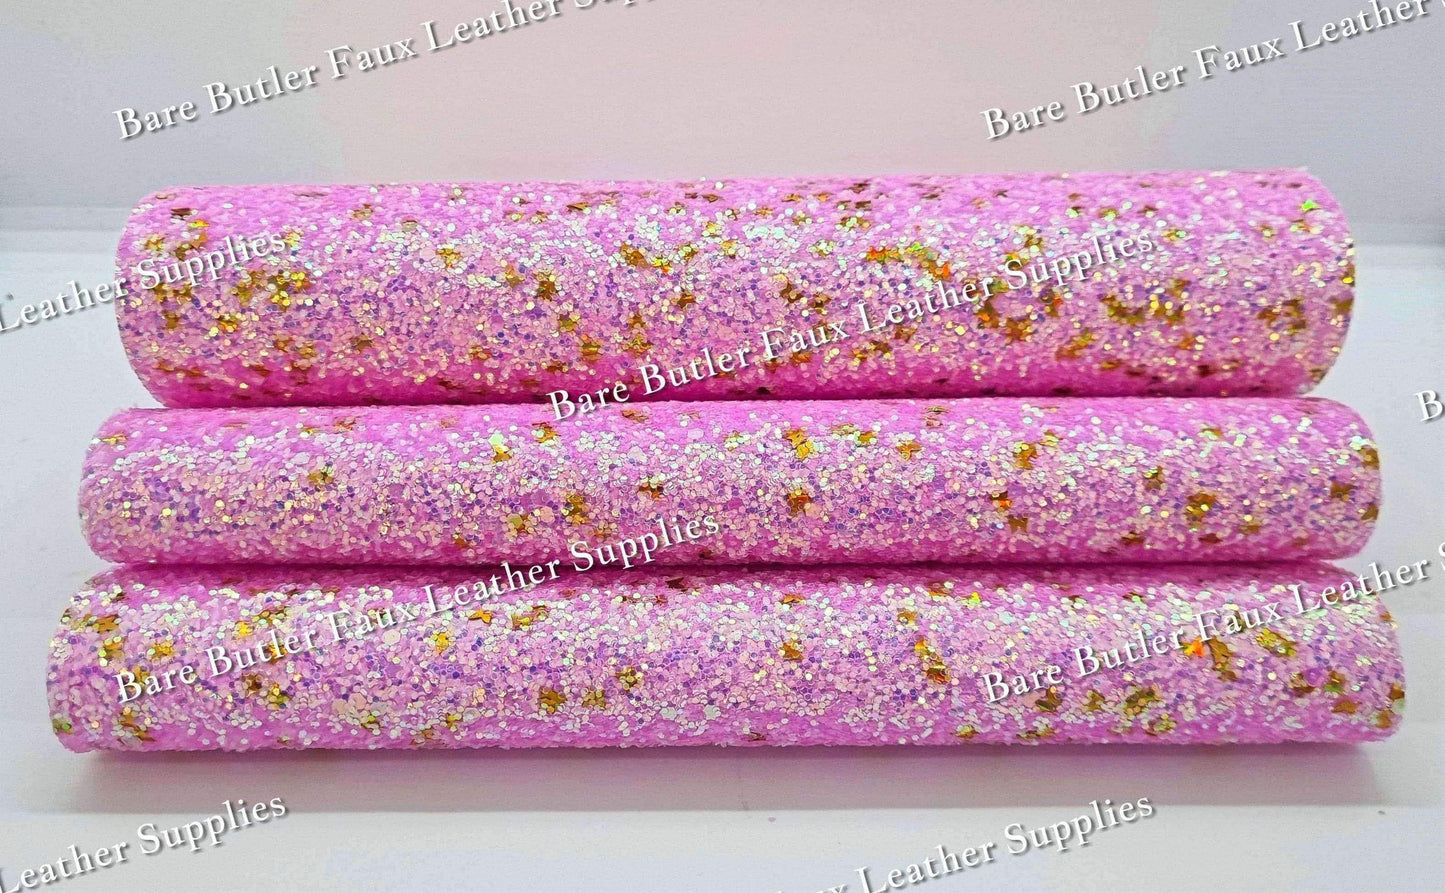 Chunky Glitter - Pink/Gold Shimmer - Chunky, Faux, Faux Leather, glitter, gold, leather, leatherette, Pink, sparkles - Bare Butler Faux Leather Supplies 